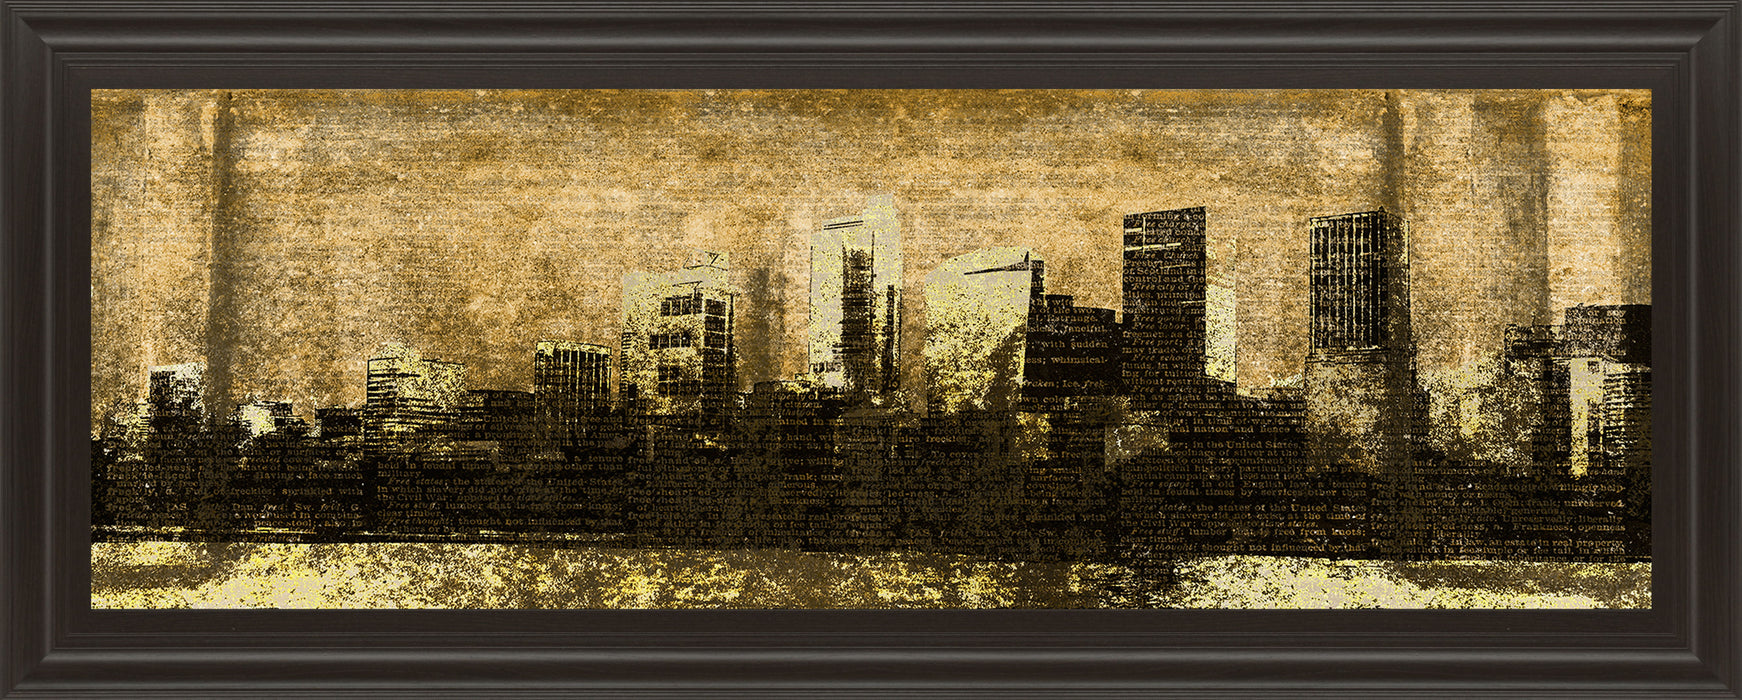 Defined City I By Sd Graphic Studio - Framed Print Wall Art - Black